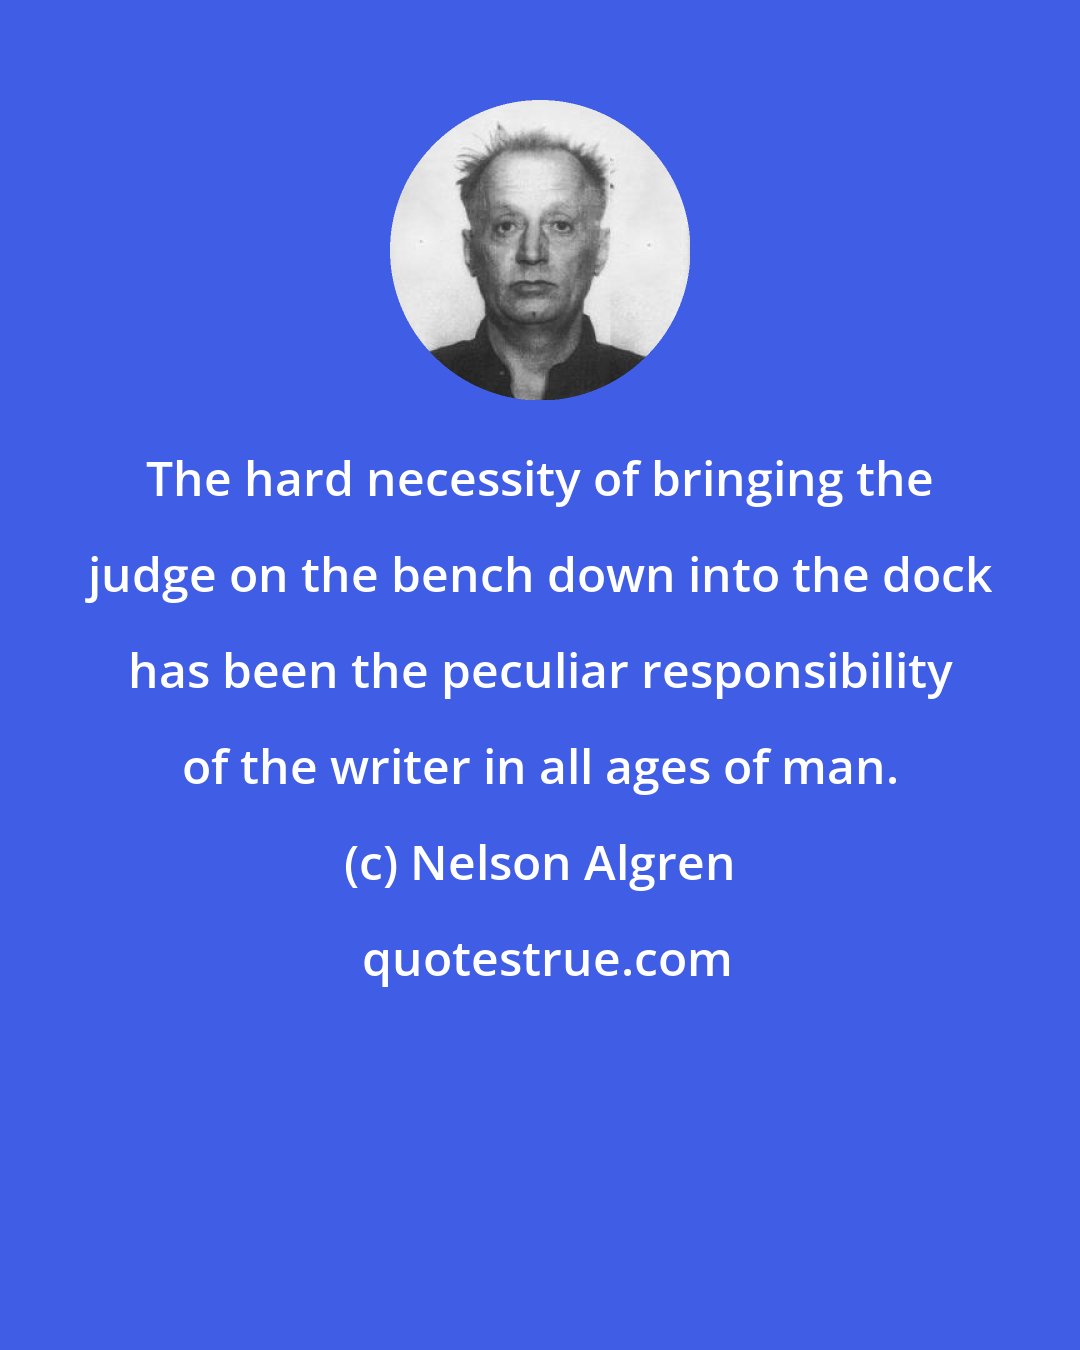 Nelson Algren: The hard necessity of bringing the judge on the bench down into the dock has been the peculiar responsibility of the writer in all ages of man.